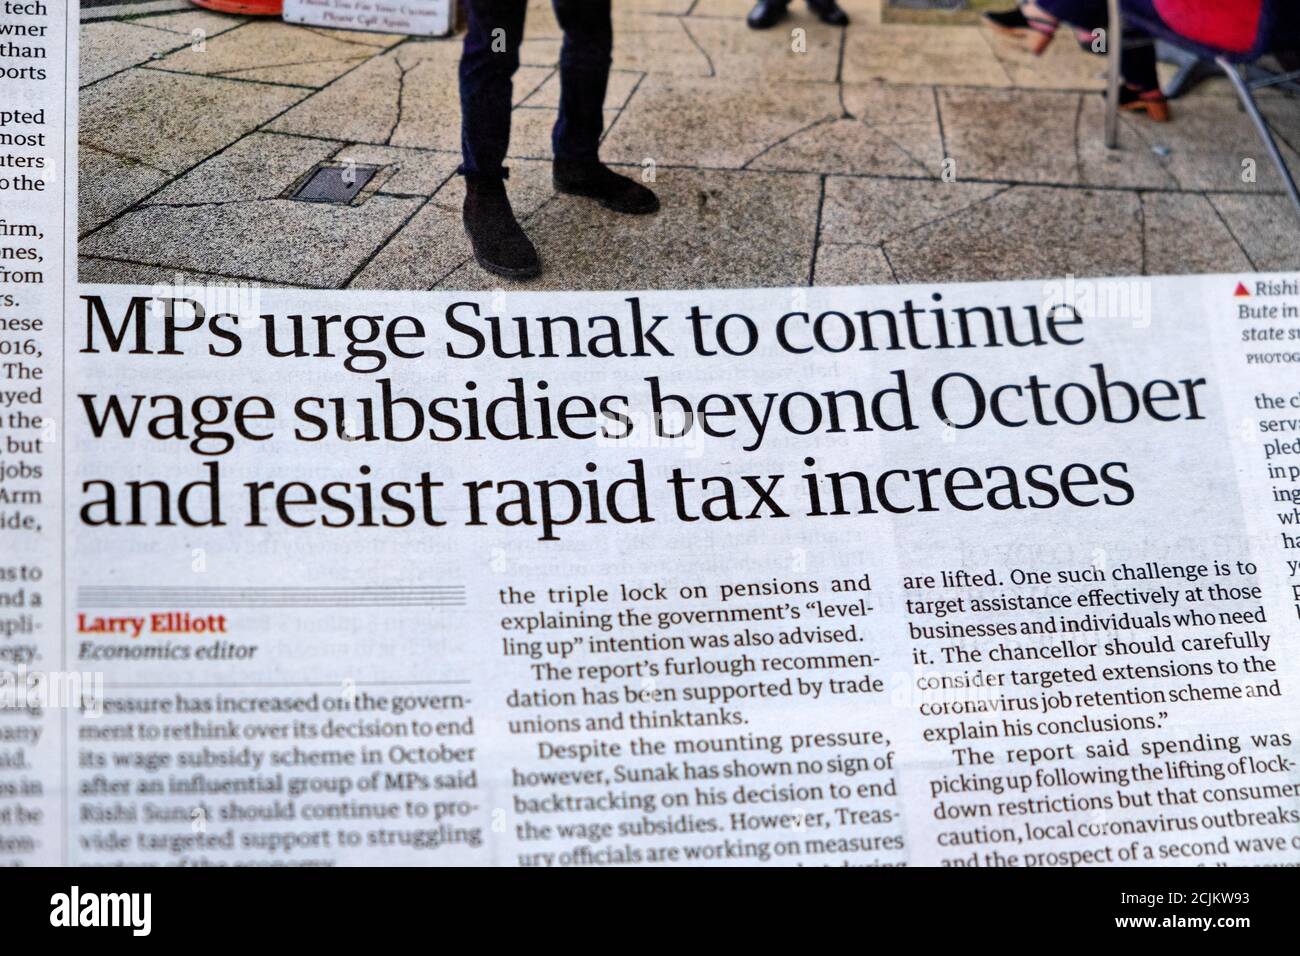 'MP's urge Sunak to continue wage subsidies beyond October and resist rapid tax increases' newspaper headline clipping September 2020 London UK Stock Photo